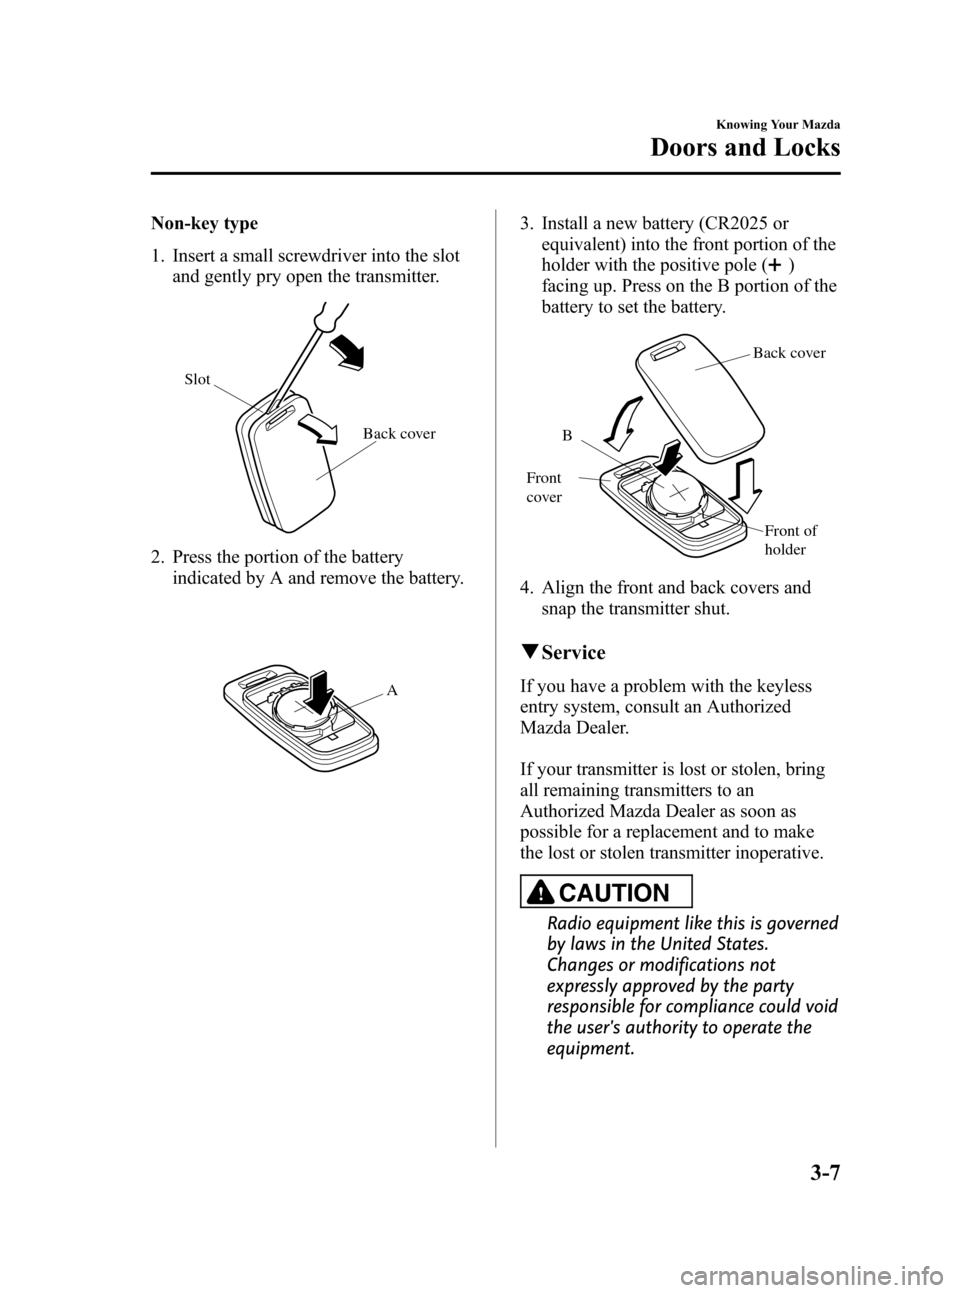 MAZDA MODEL 3 HATCHBACK 2008  Owners Manual (in English) Black plate (79,1)
Non-key type
1. Insert a small screwdriver into the slot
and gently pry open the transmitter.
Back cover Slot
2. Press the portion of the battery
indicated by A and remove the batte